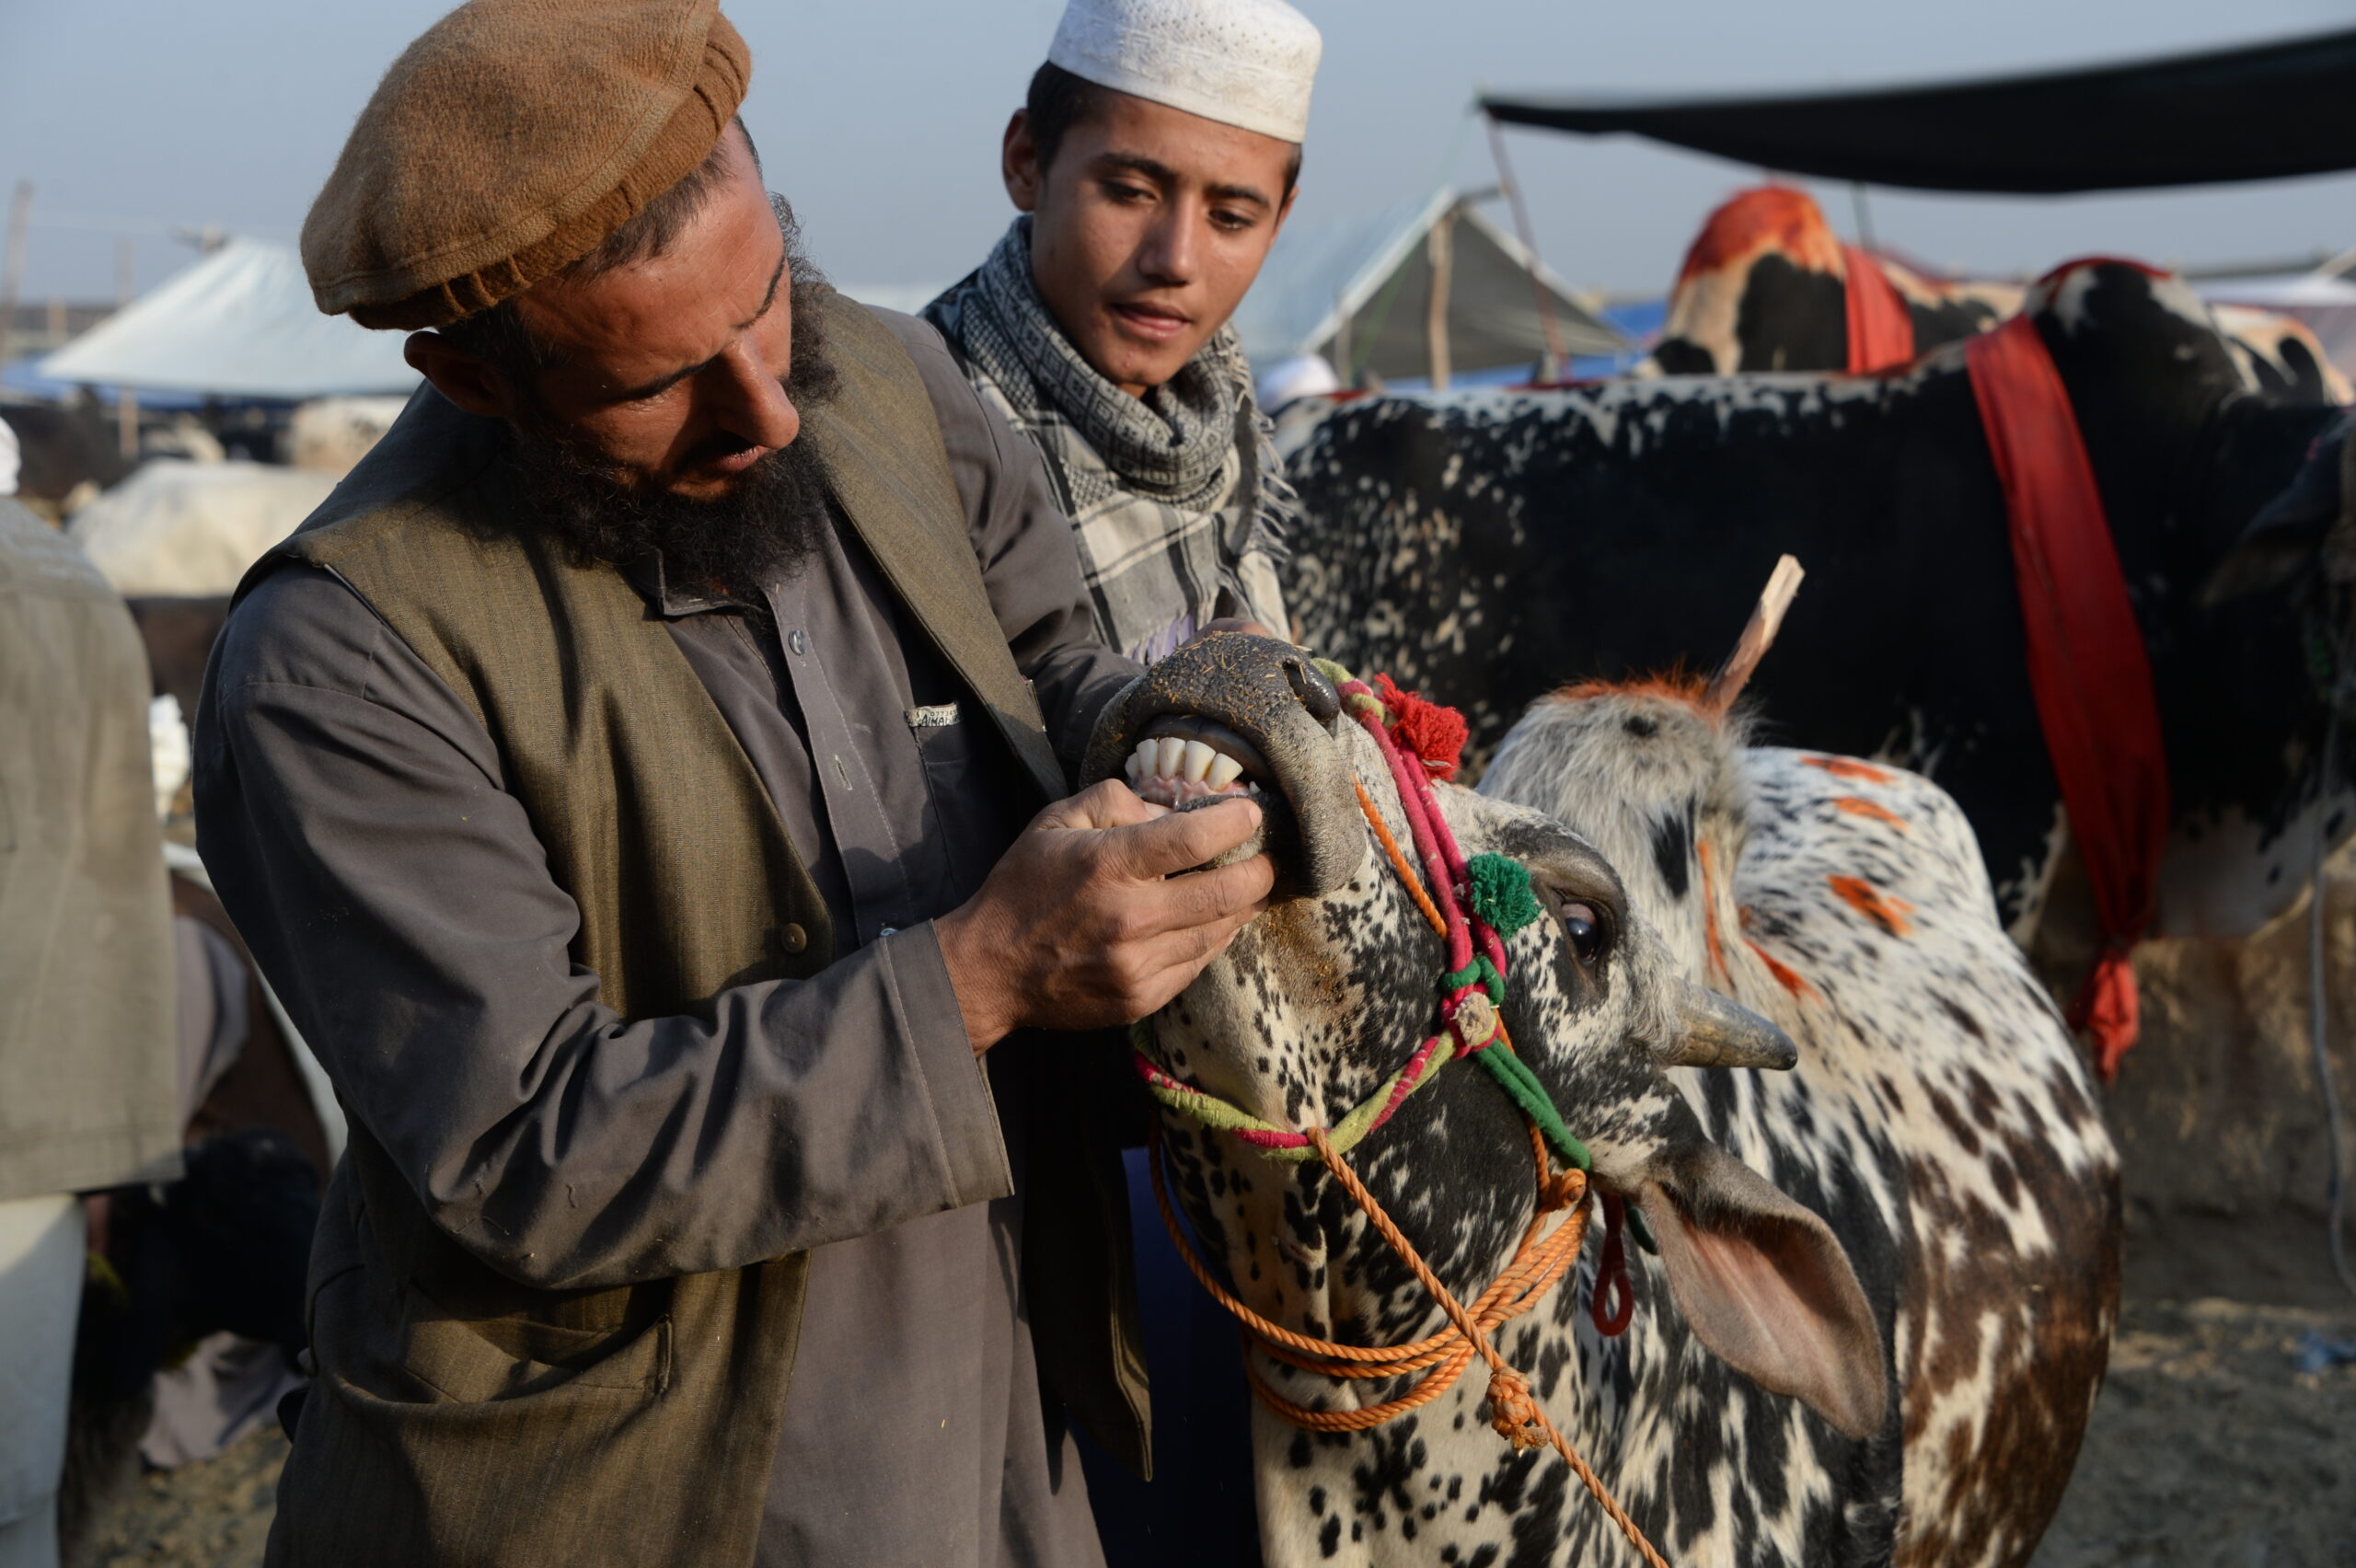 The local livestock market in the suburbs of Kabul on the eve of Eid al-Adha